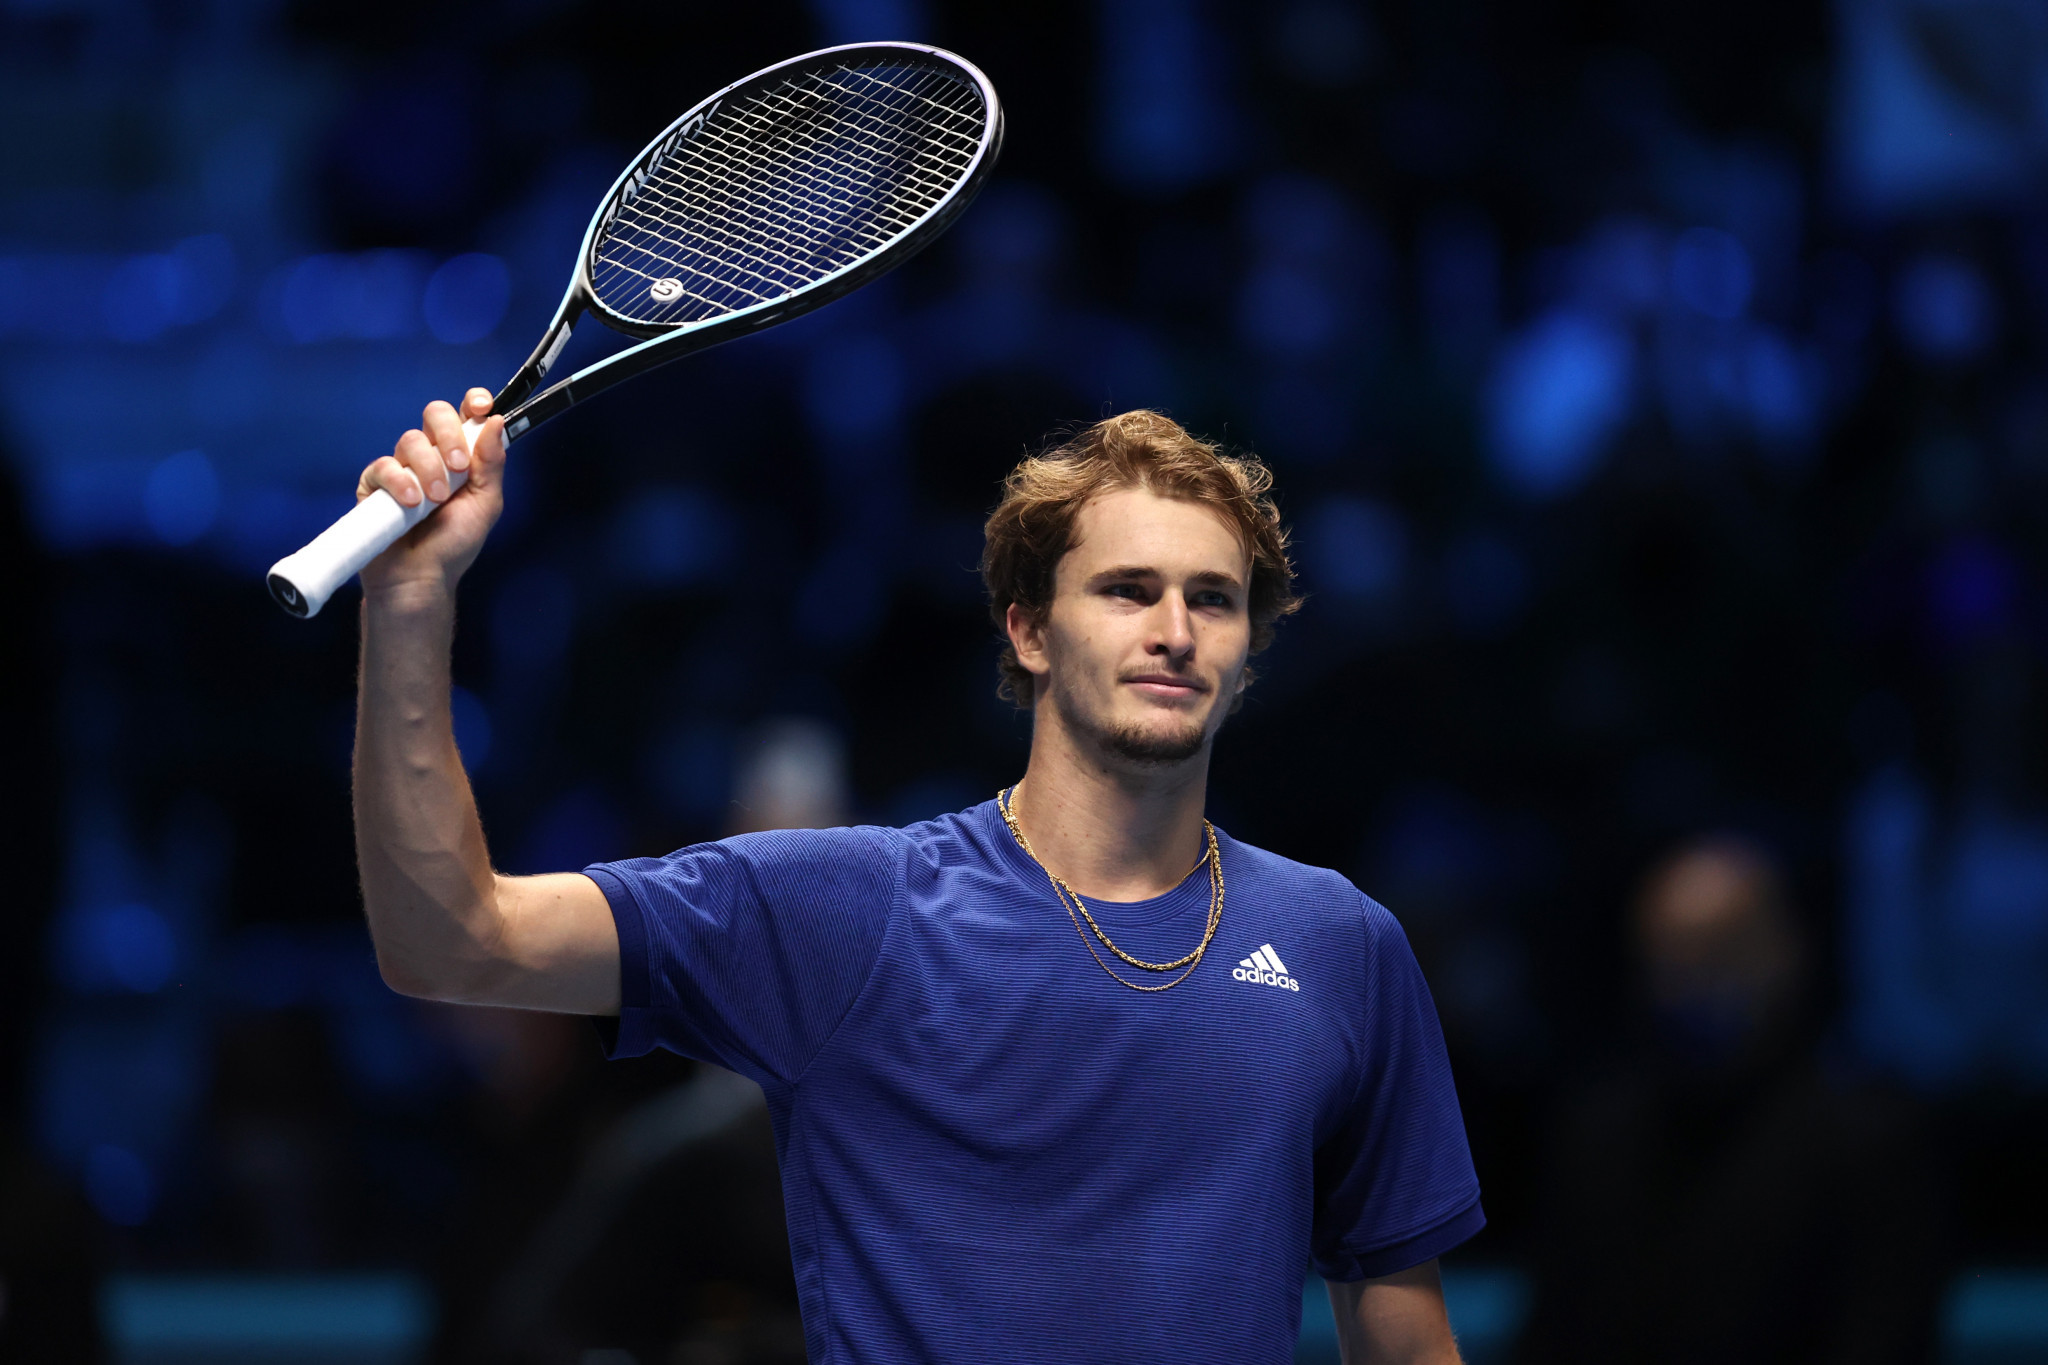 Alexander Zverev beat Hubert Hurkazc 6-2, 6-4 to secure his place in the ATP Finals semi-finals ©Getty Images